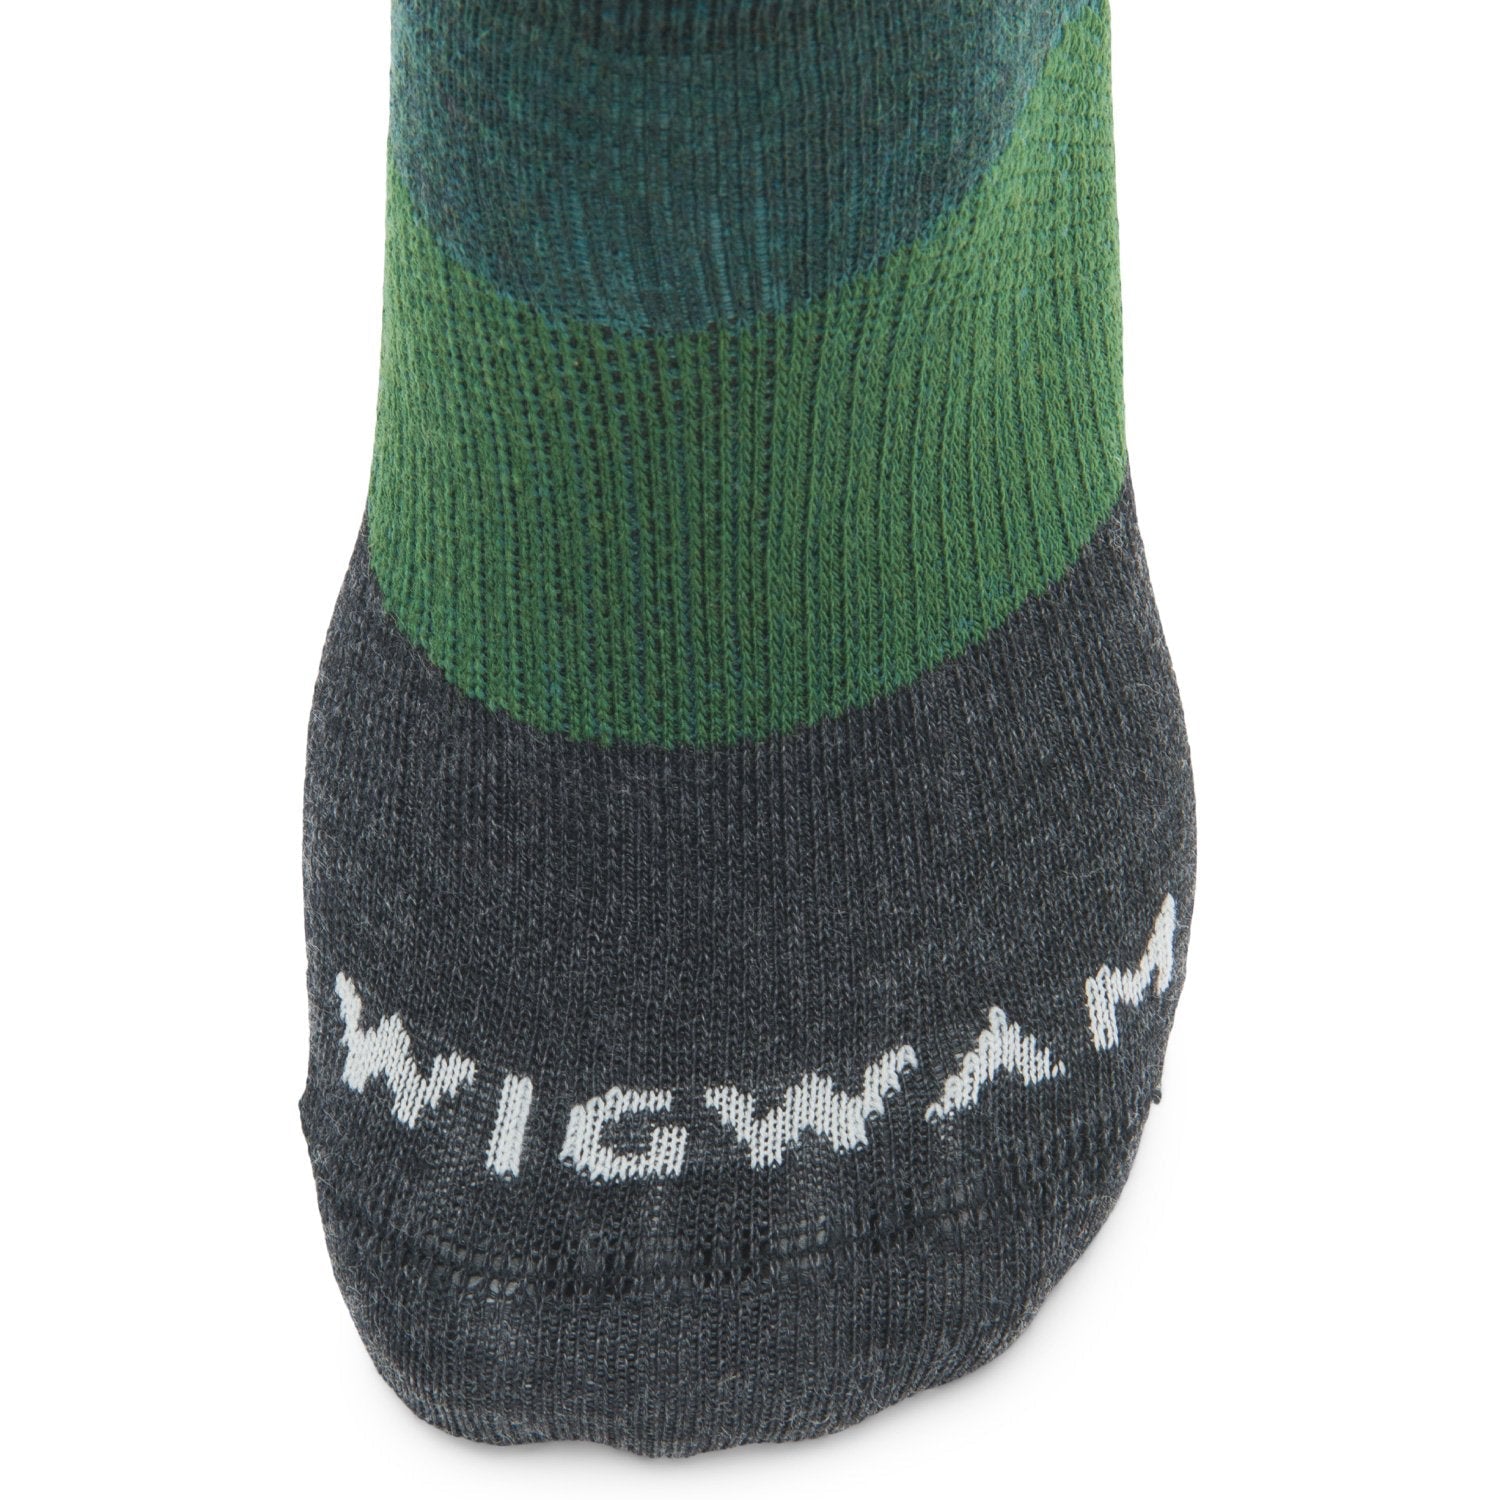 Trail Junkie Ultralight Low Sock With Merino Wool - June Bug toe perspective - made in The USA Wigwam Socks